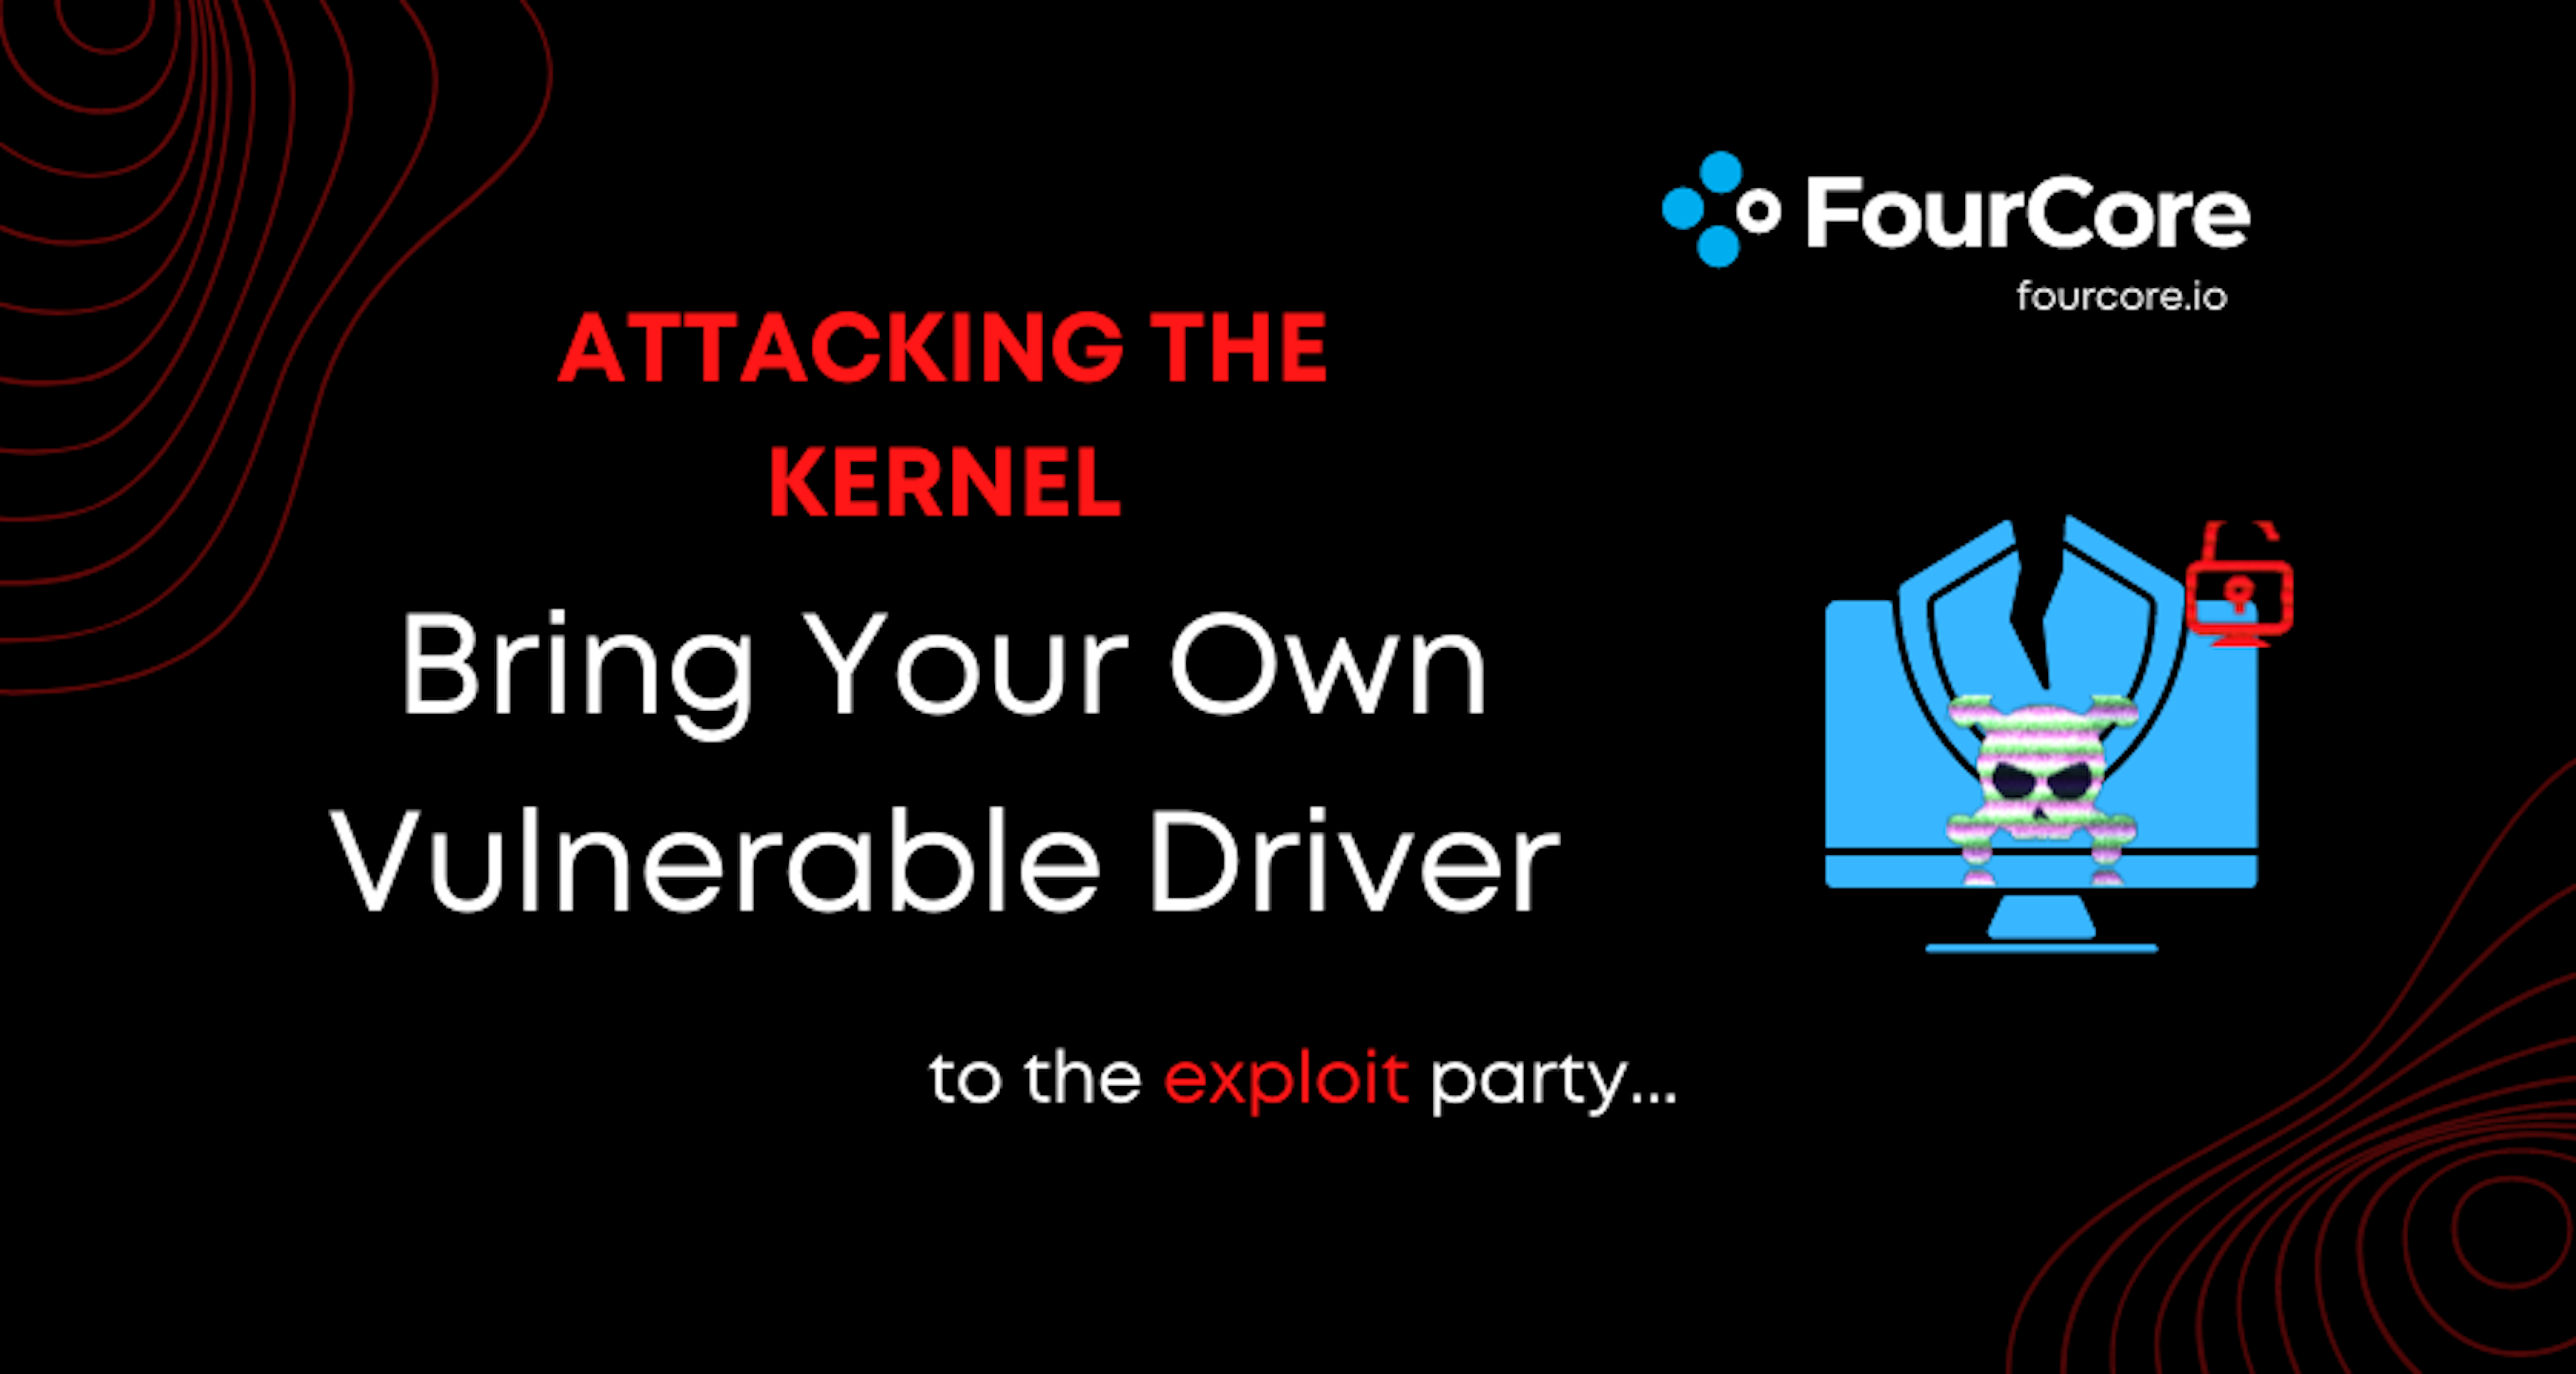 Exploit Party: Bring Your Own Vulnerable Driver Attacks Blog Post Image